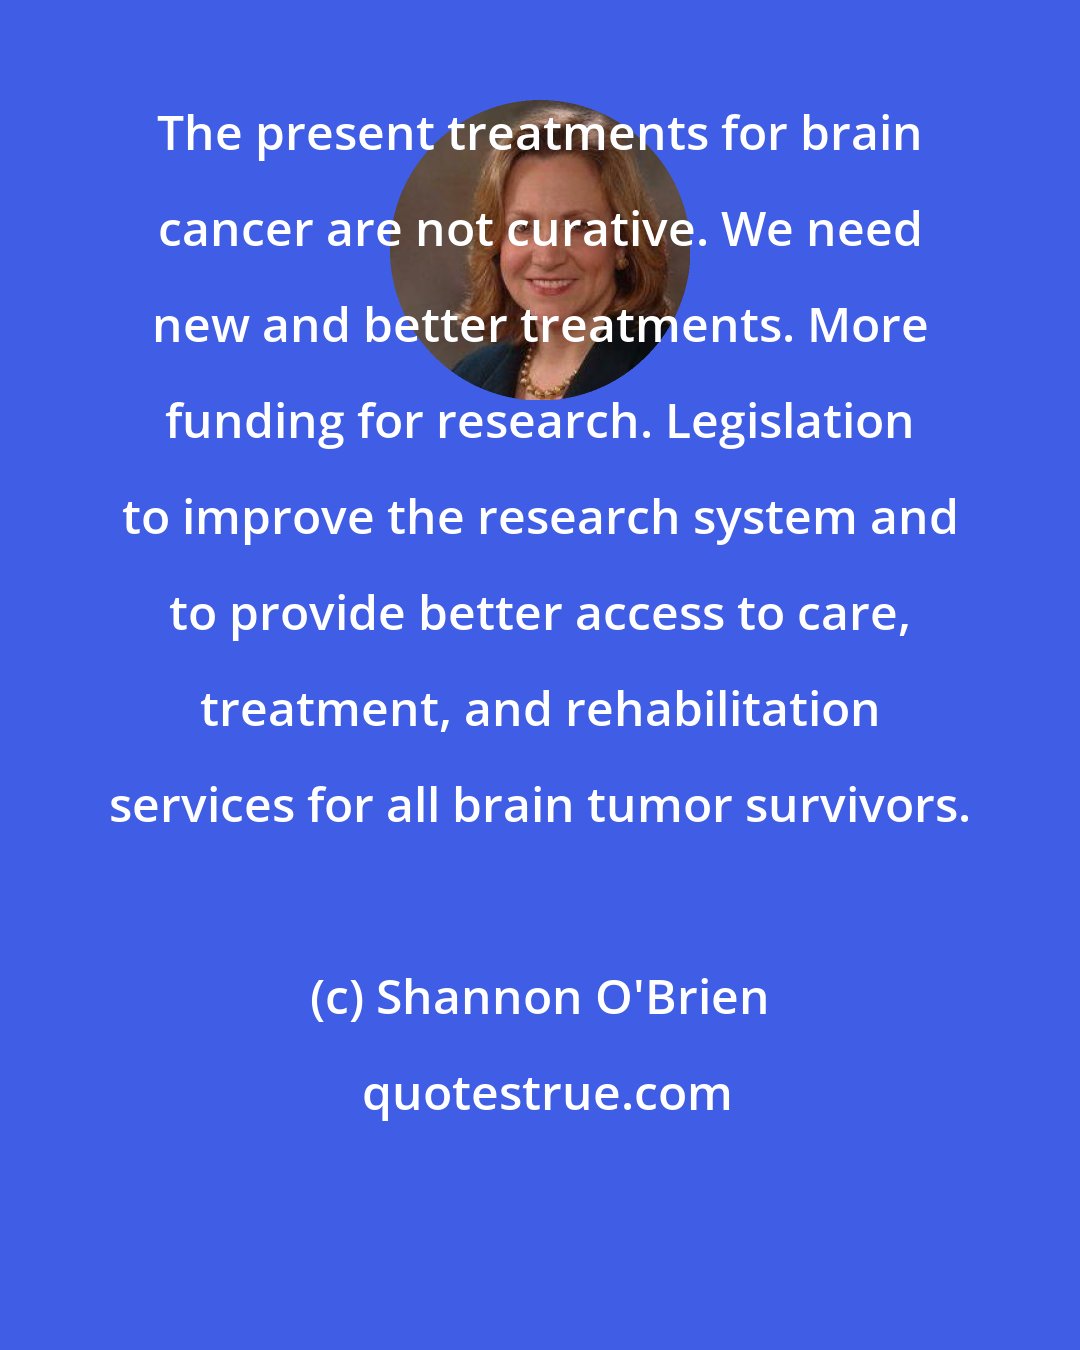 Shannon O'Brien: The present treatments for brain cancer are not curative. We need new and better treatments. More funding for research. Legislation to improve the research system and to provide better access to care, treatment, and rehabilitation services for all brain tumor survivors.